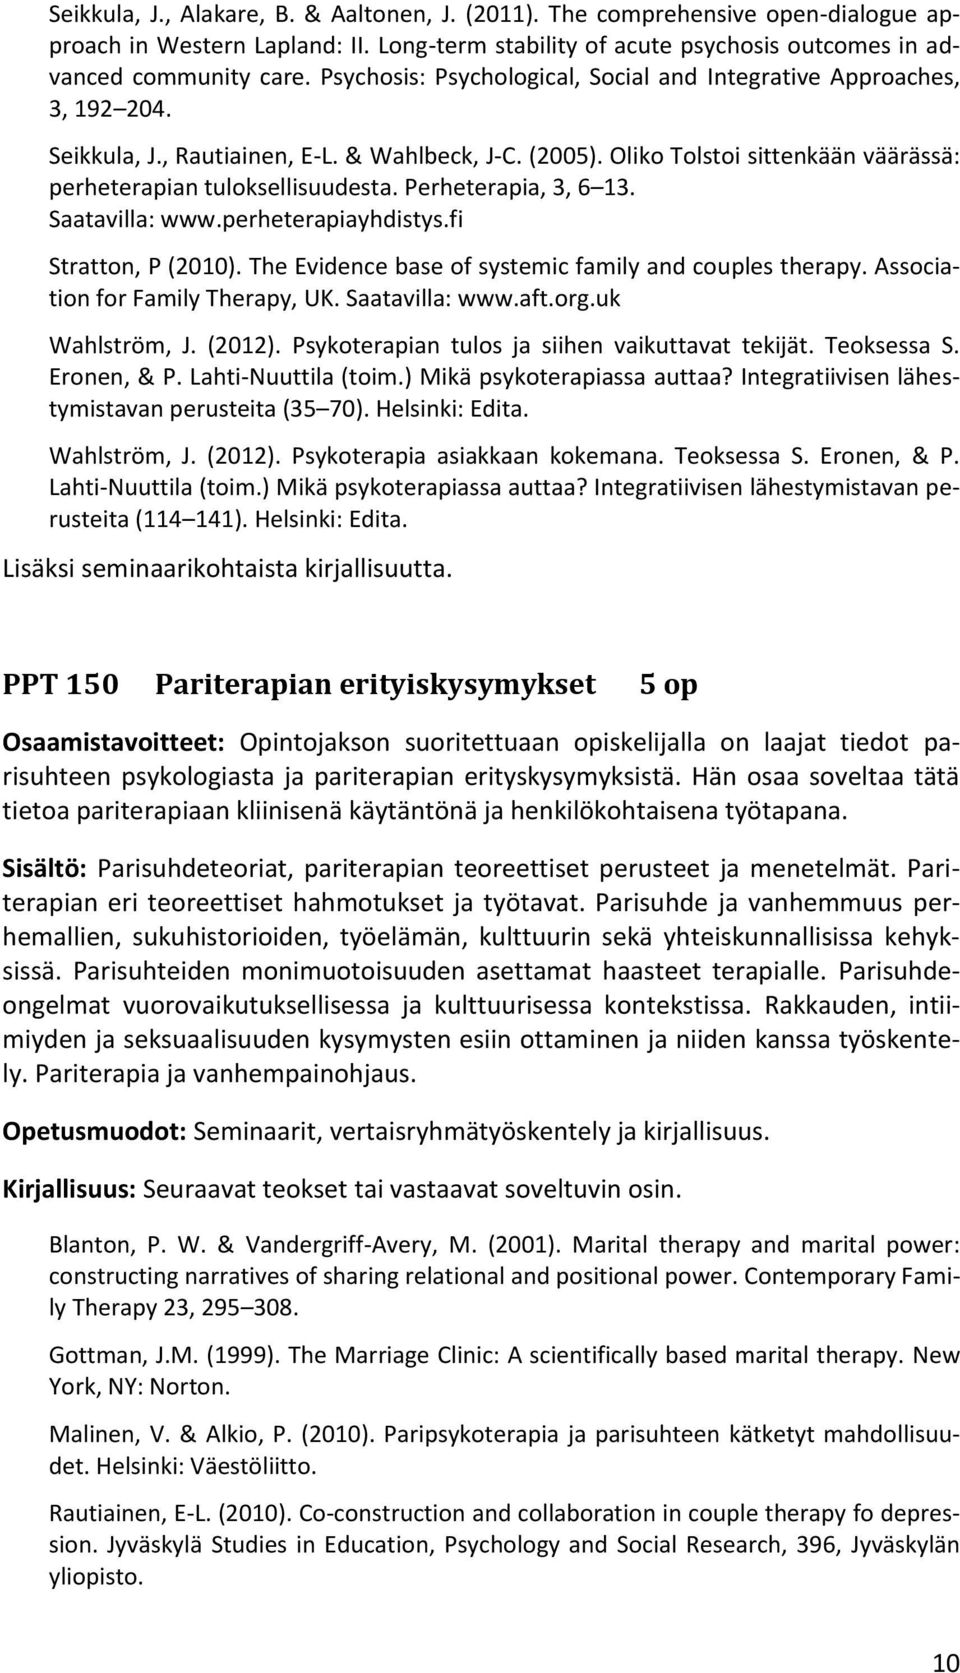 Perheterapia, 3, 6 13. Saatavilla: www.perheterapiayhdistys.fi Stratton, P (2010). The Evidence base of systemic family and couples therapy. Association for Family Therapy, UK. Saatavilla: www.aft.